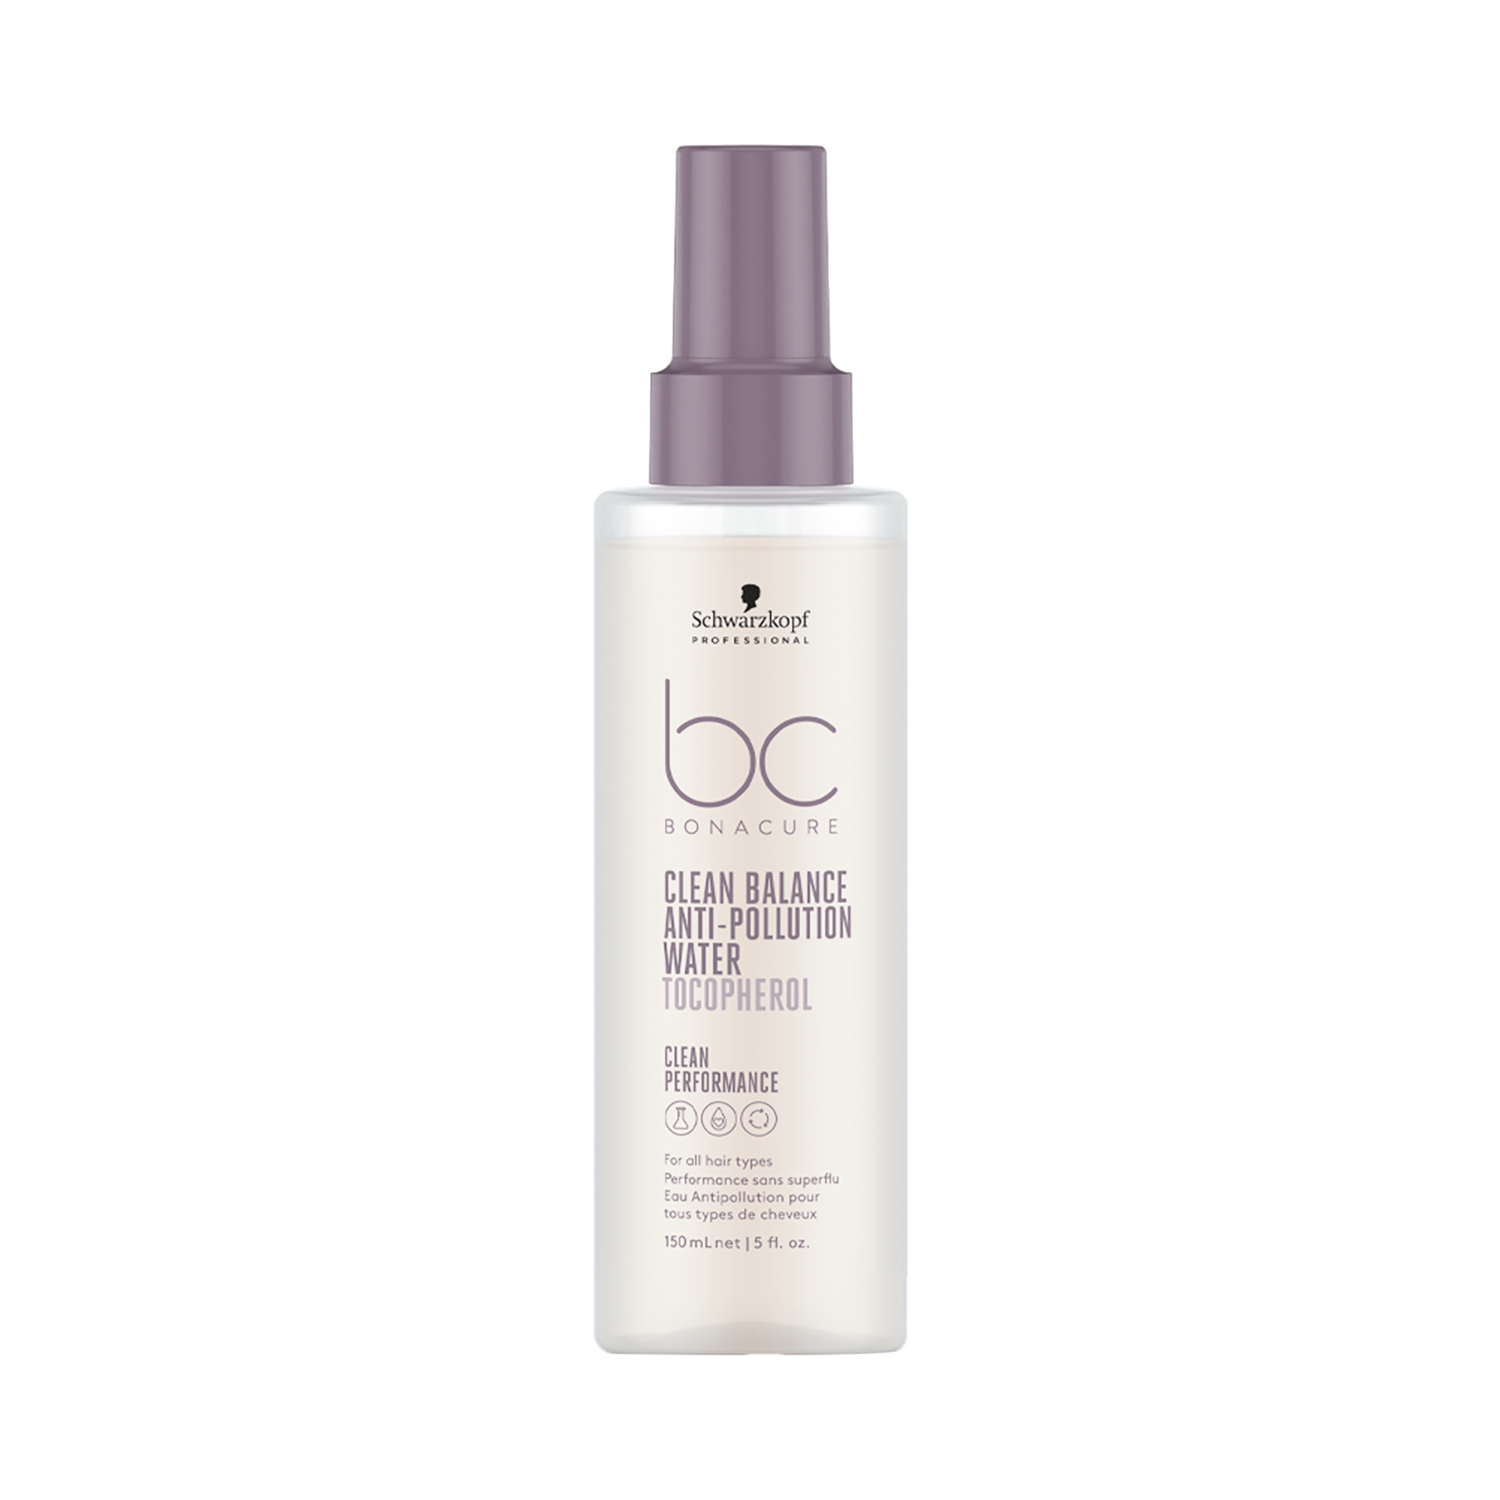 Schwarzkopf Professional | Schwarzkopf Professional Bonacure Clean Balance Anti-Pollution Water With Tocopherol (150ml)